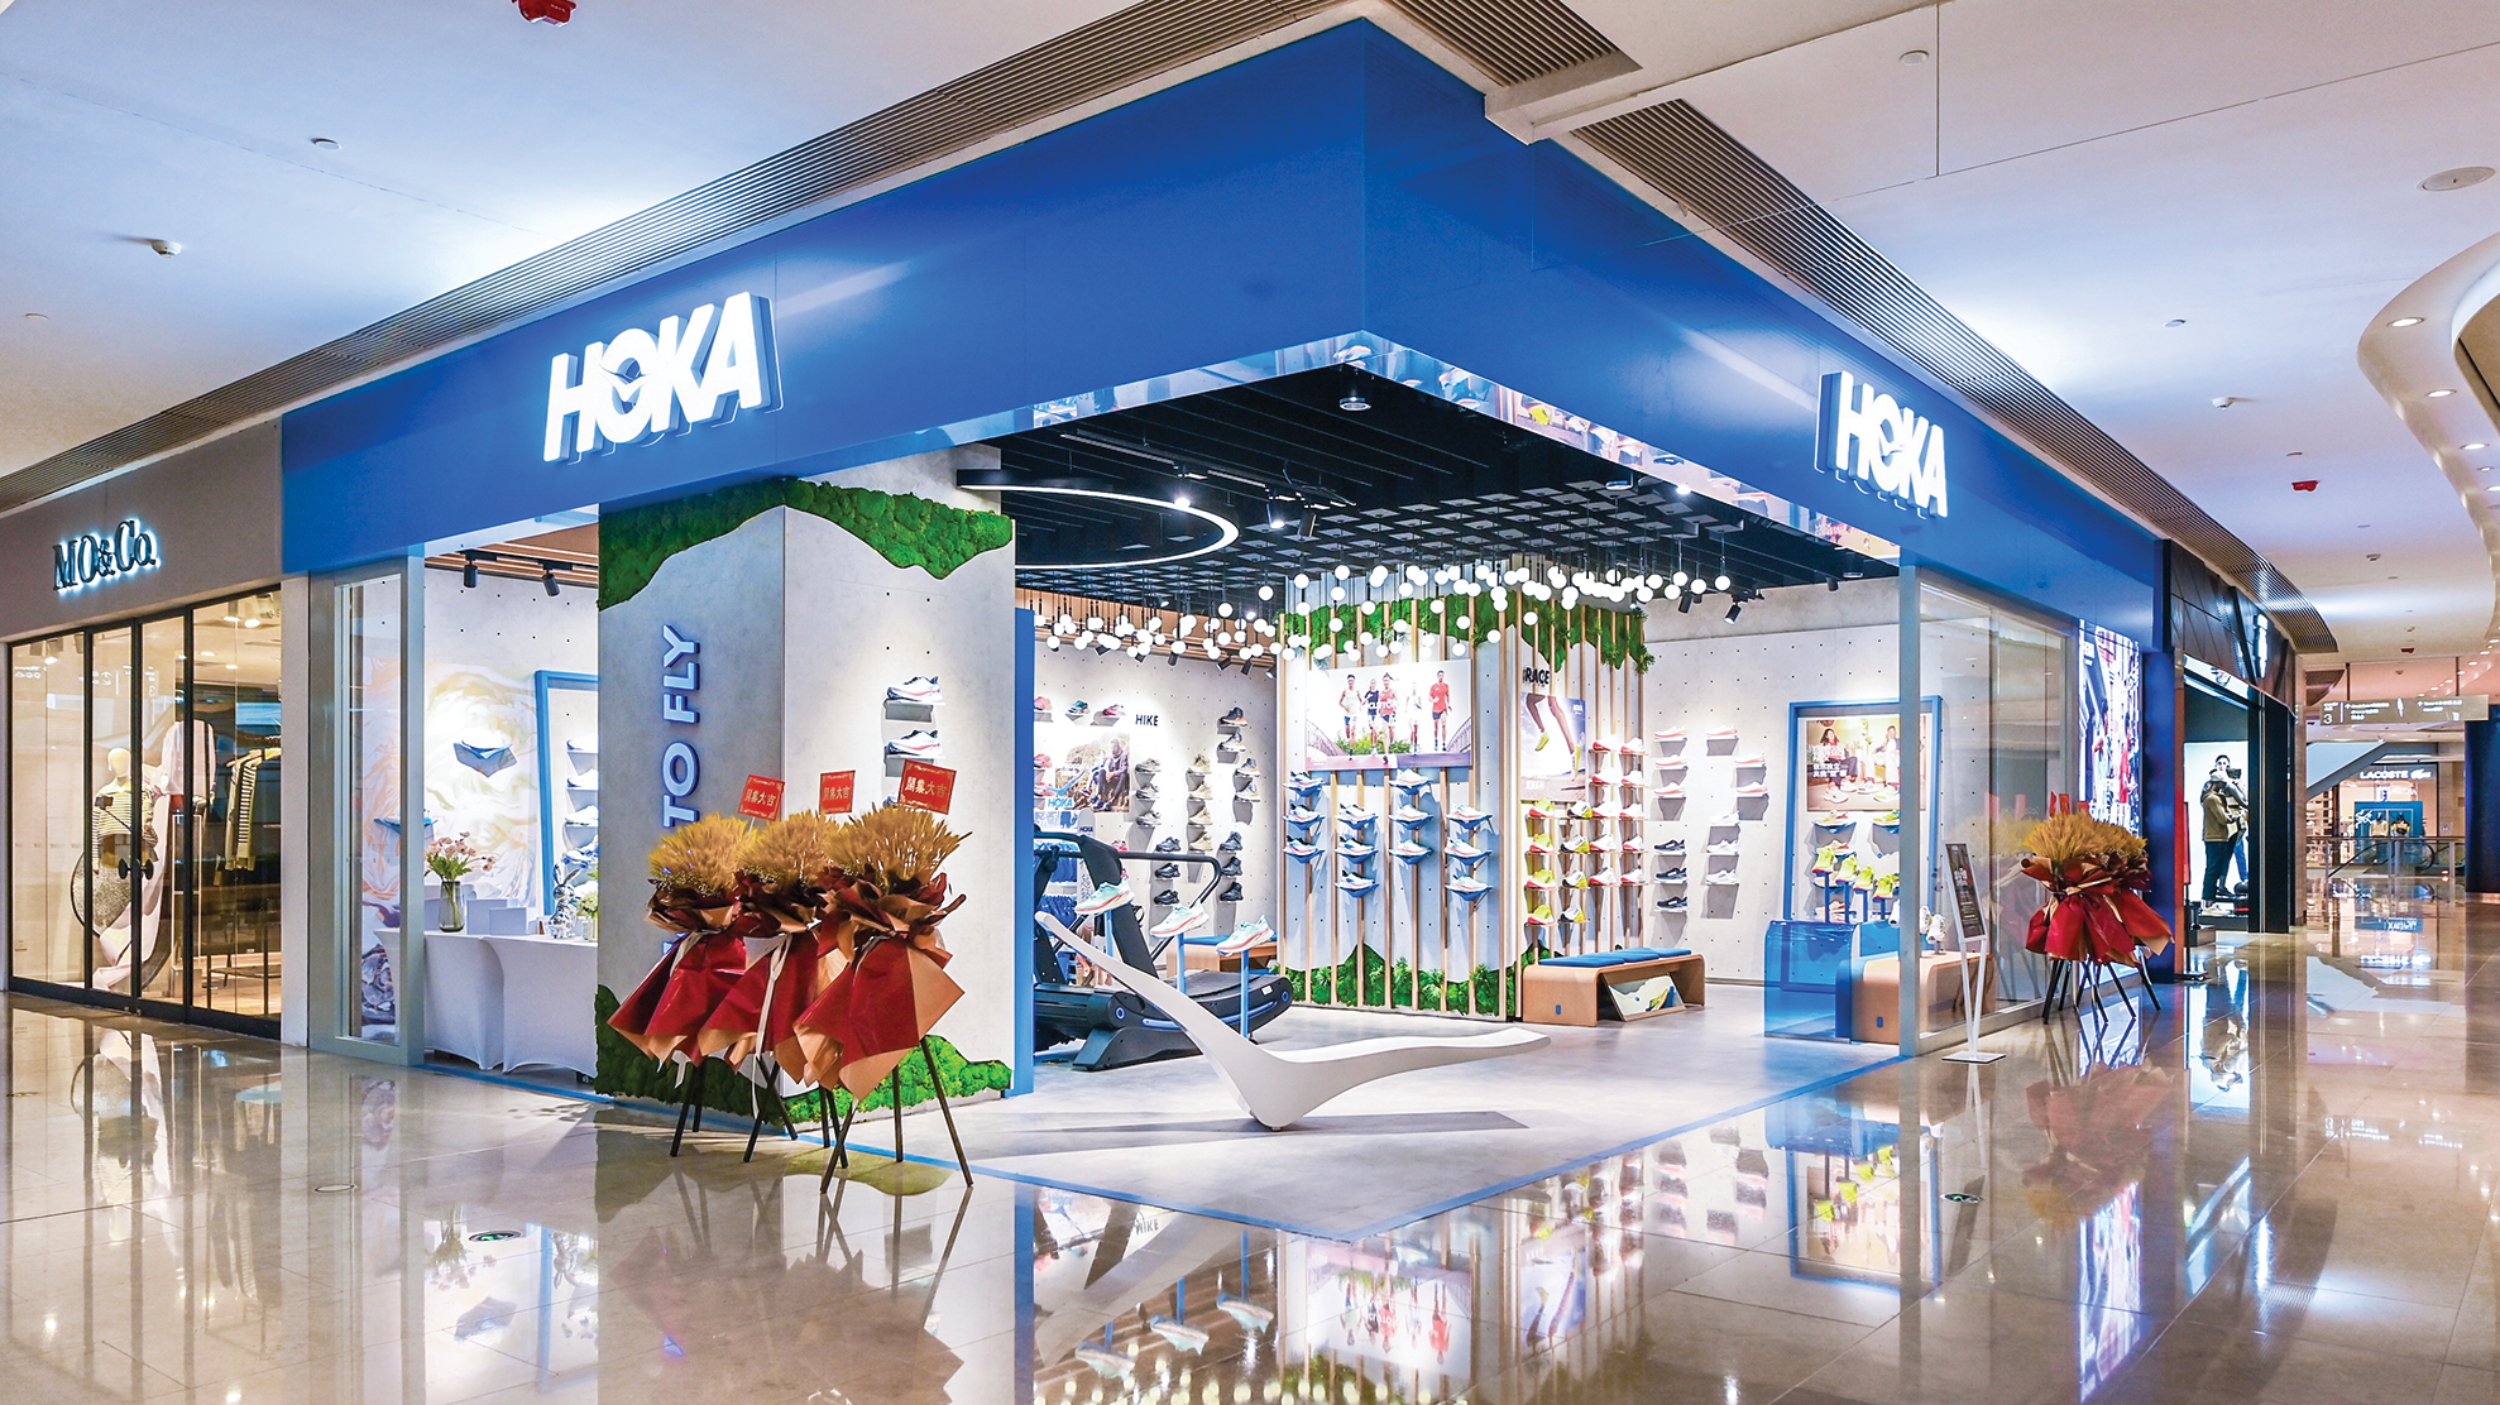 Similar to the Nanjing Road location (shown below), the Hoka store at Shanghai’s Kerry Centre mall boasts a flexible merchandising system. 